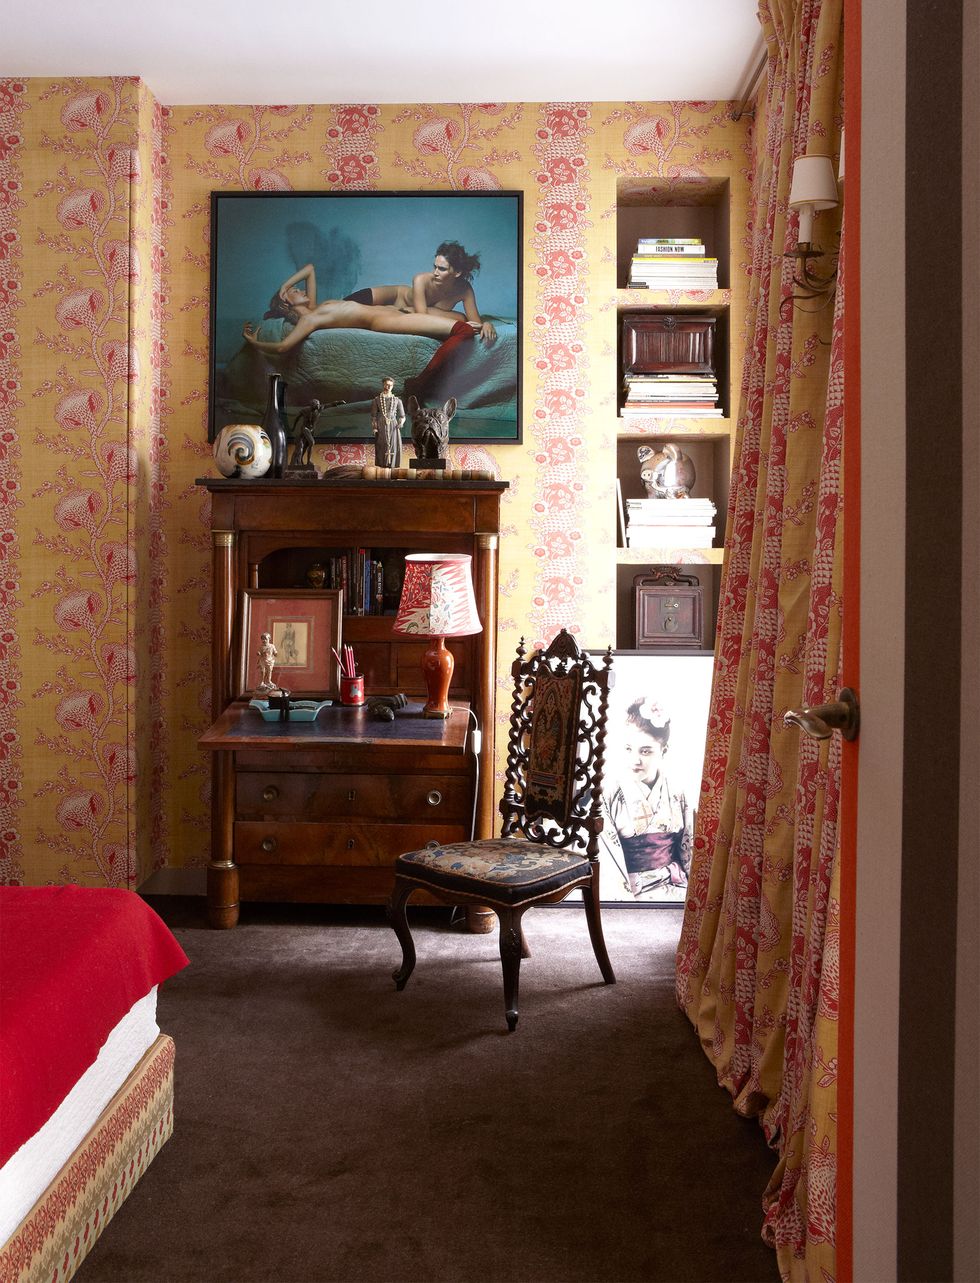 detail of guest room with a door with curtain on the right and a secretary with intricate chair and a large painting on the wall overhead